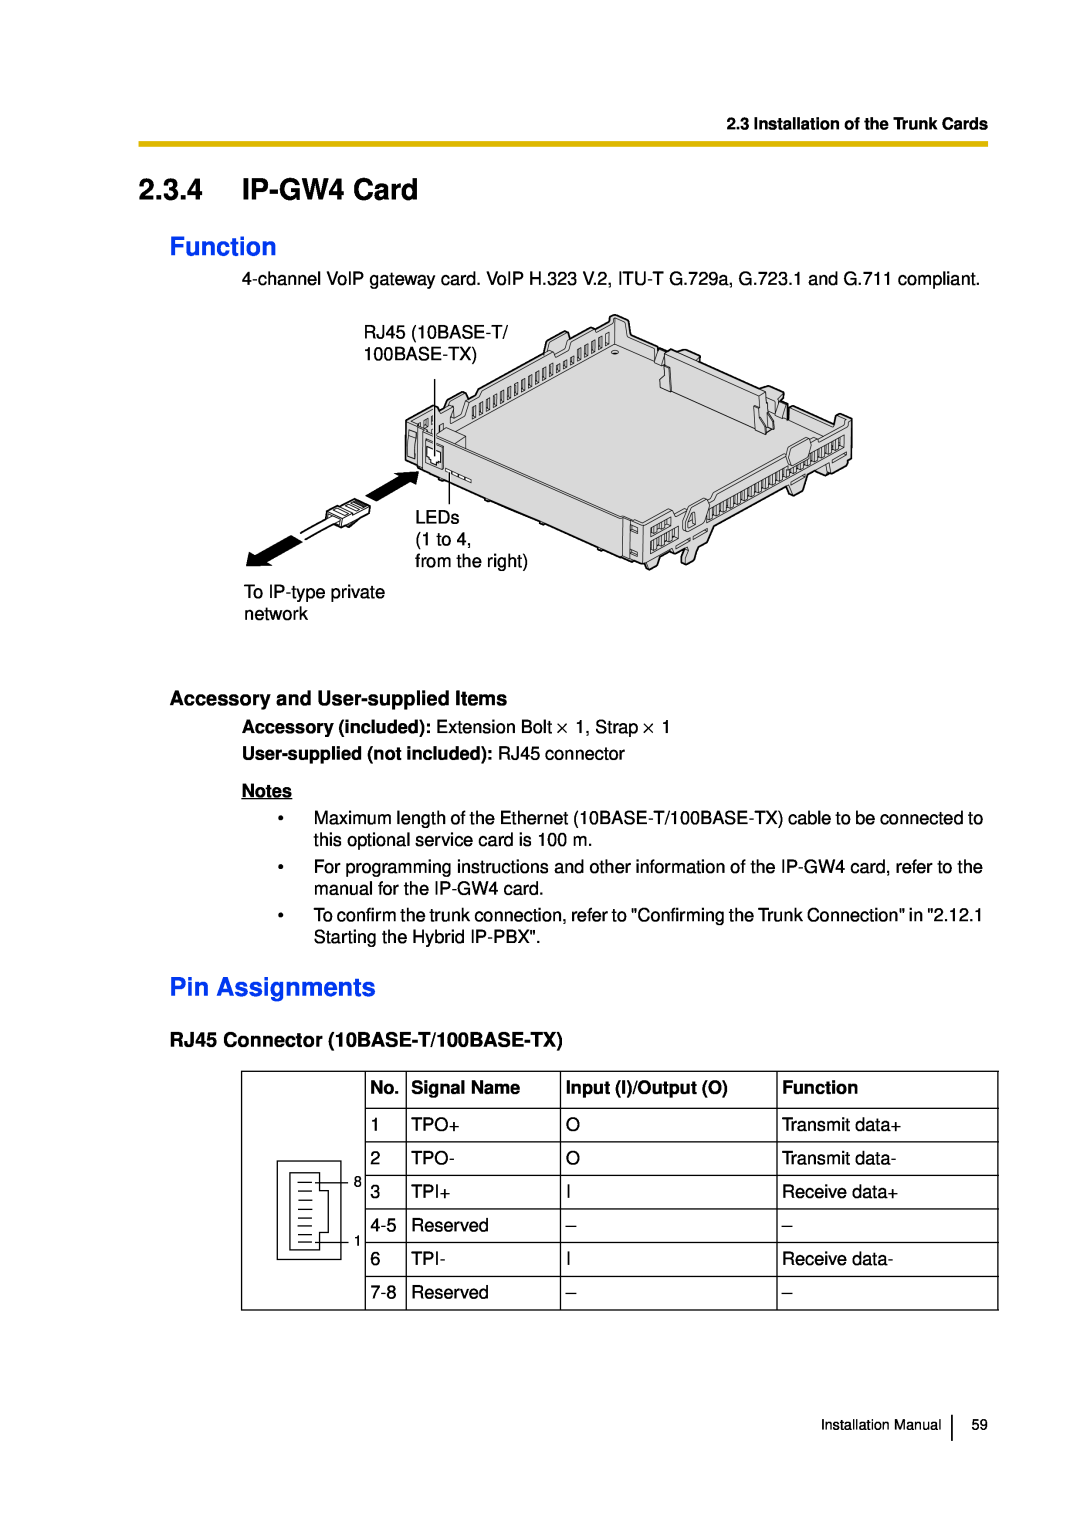 Panasonic KX-TDA30 IP-GW4Card, 2.3.4, Function, Pin Assignments, User-suppliednot included: RJ45 connector Notes 